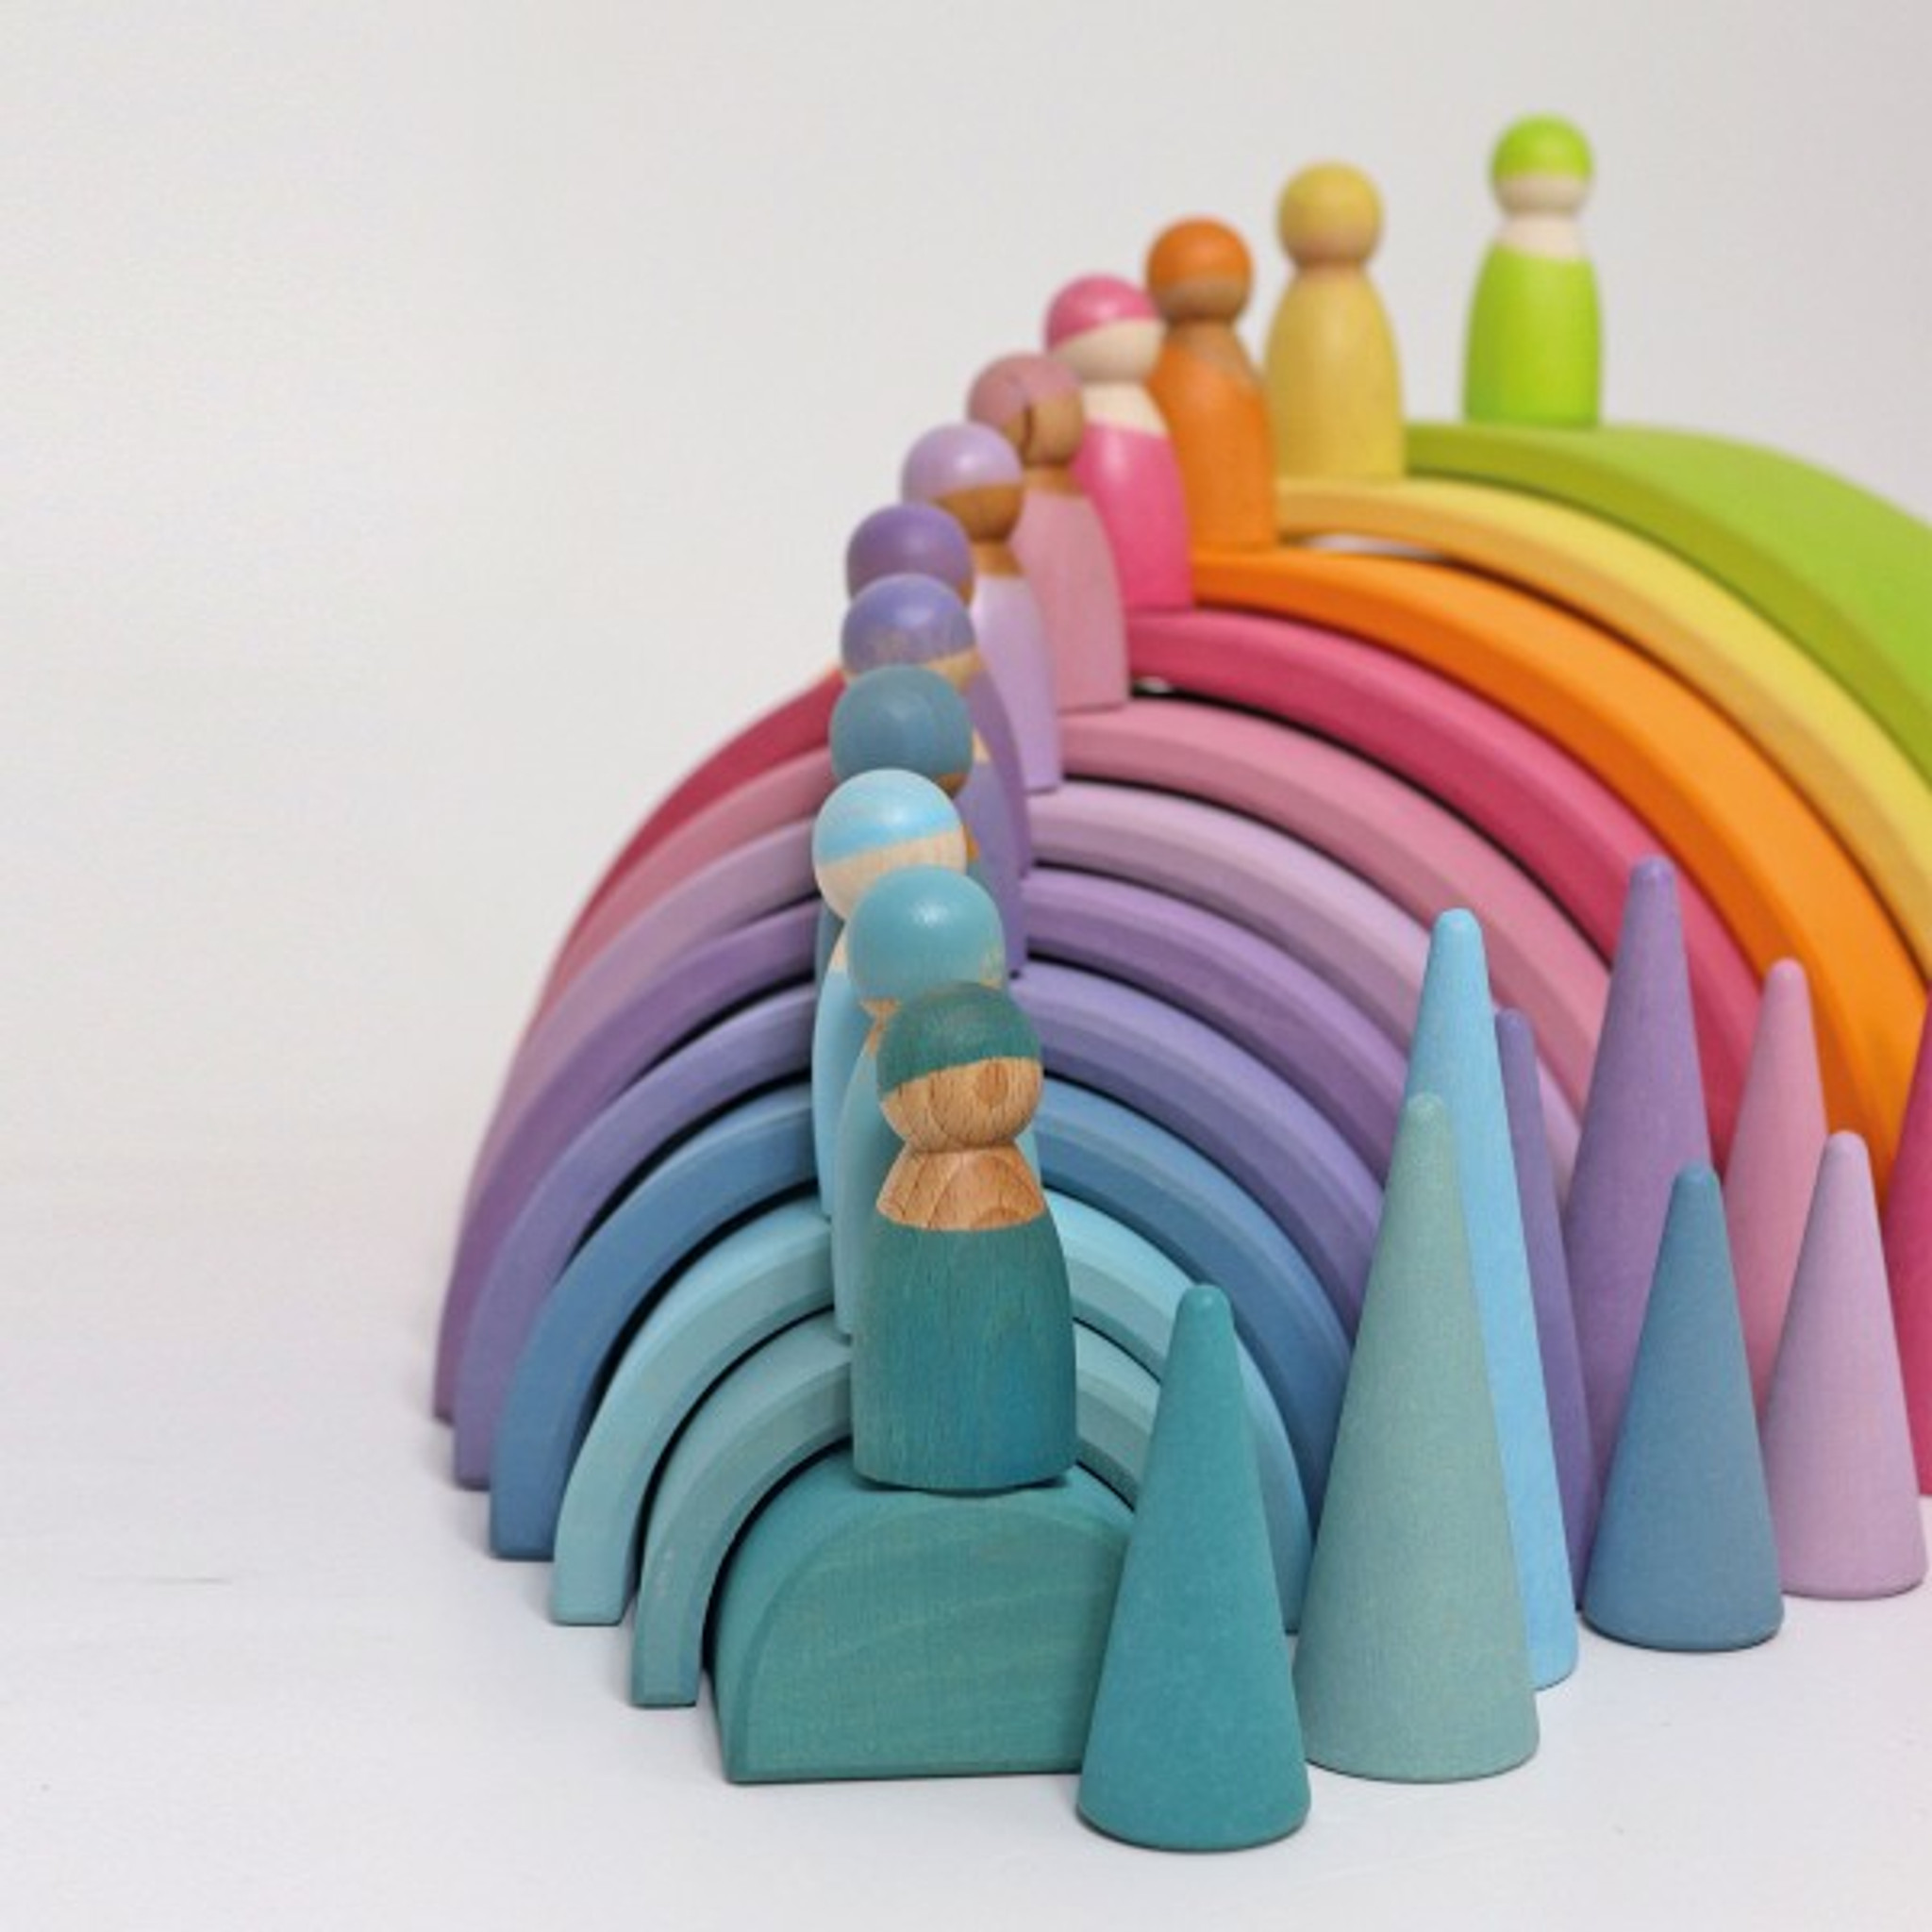 Grimm's - 12 Rainbow Friends – The Creative Toy Shop